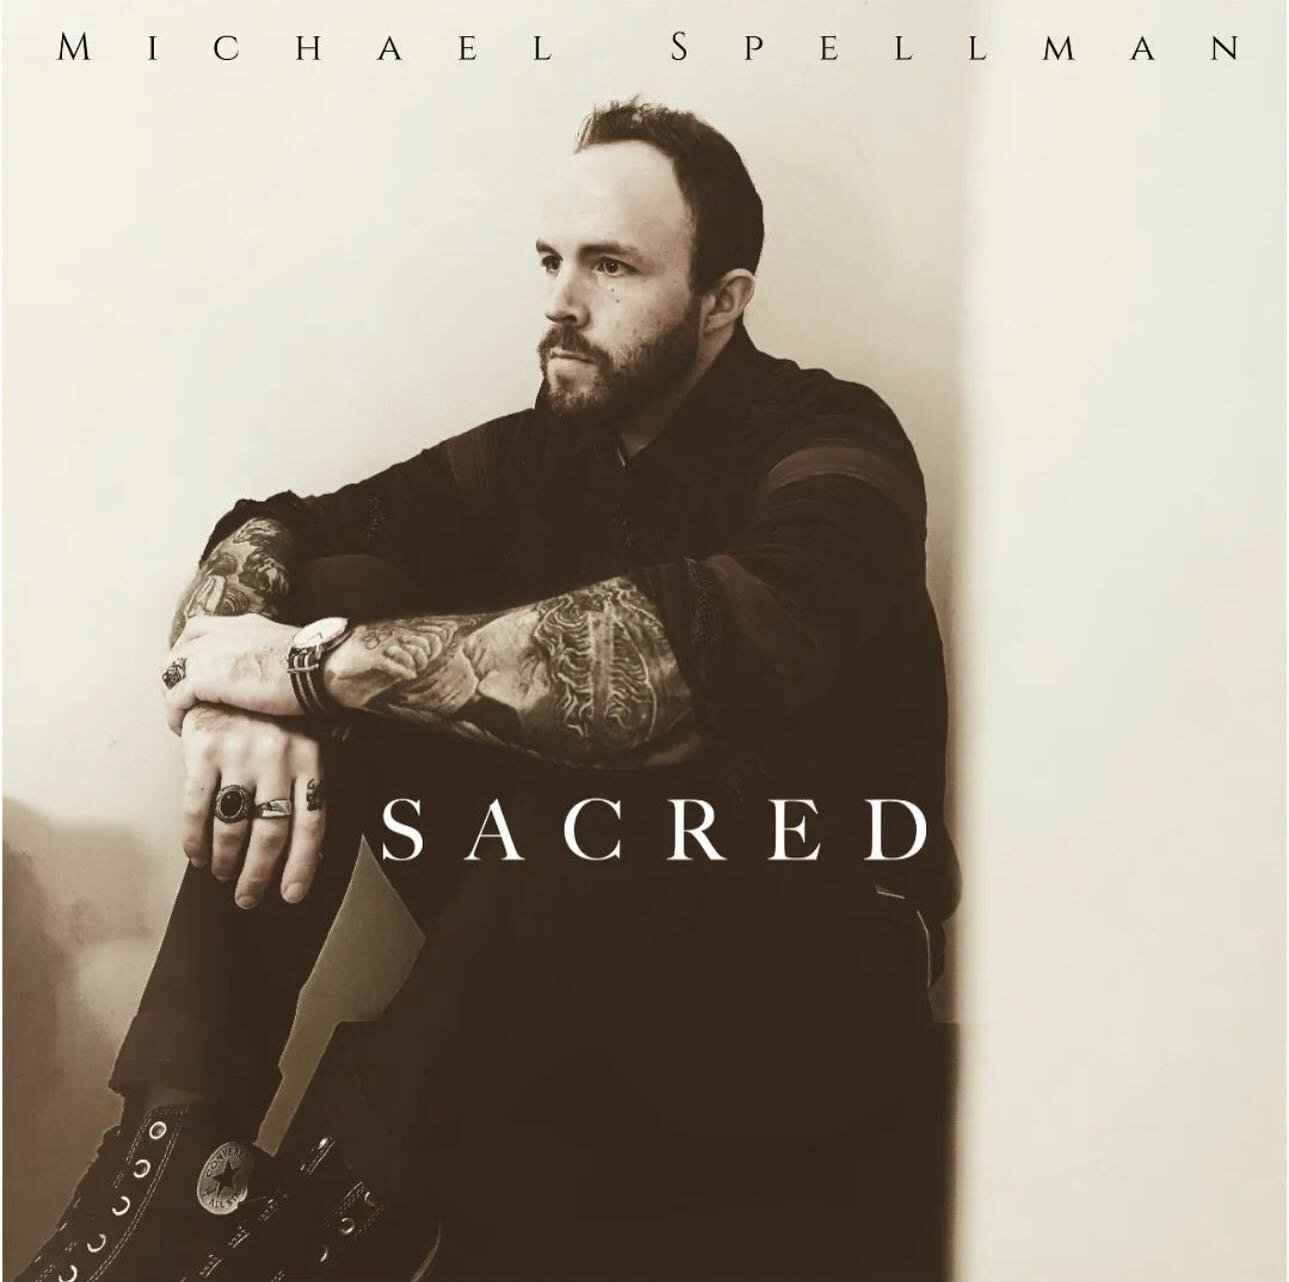 Sacred, the new single from @michael_spellman, is out now! Mastered by @plyman. 

#infrasonic #infrasonicsound #PeteLyman #ATMOS #Sony360 #ATMOSmixing #immersive #infrasonicimmersive #immersiveaudio #masteringengineer #pmcspeakers_pro #rupertnevedesi